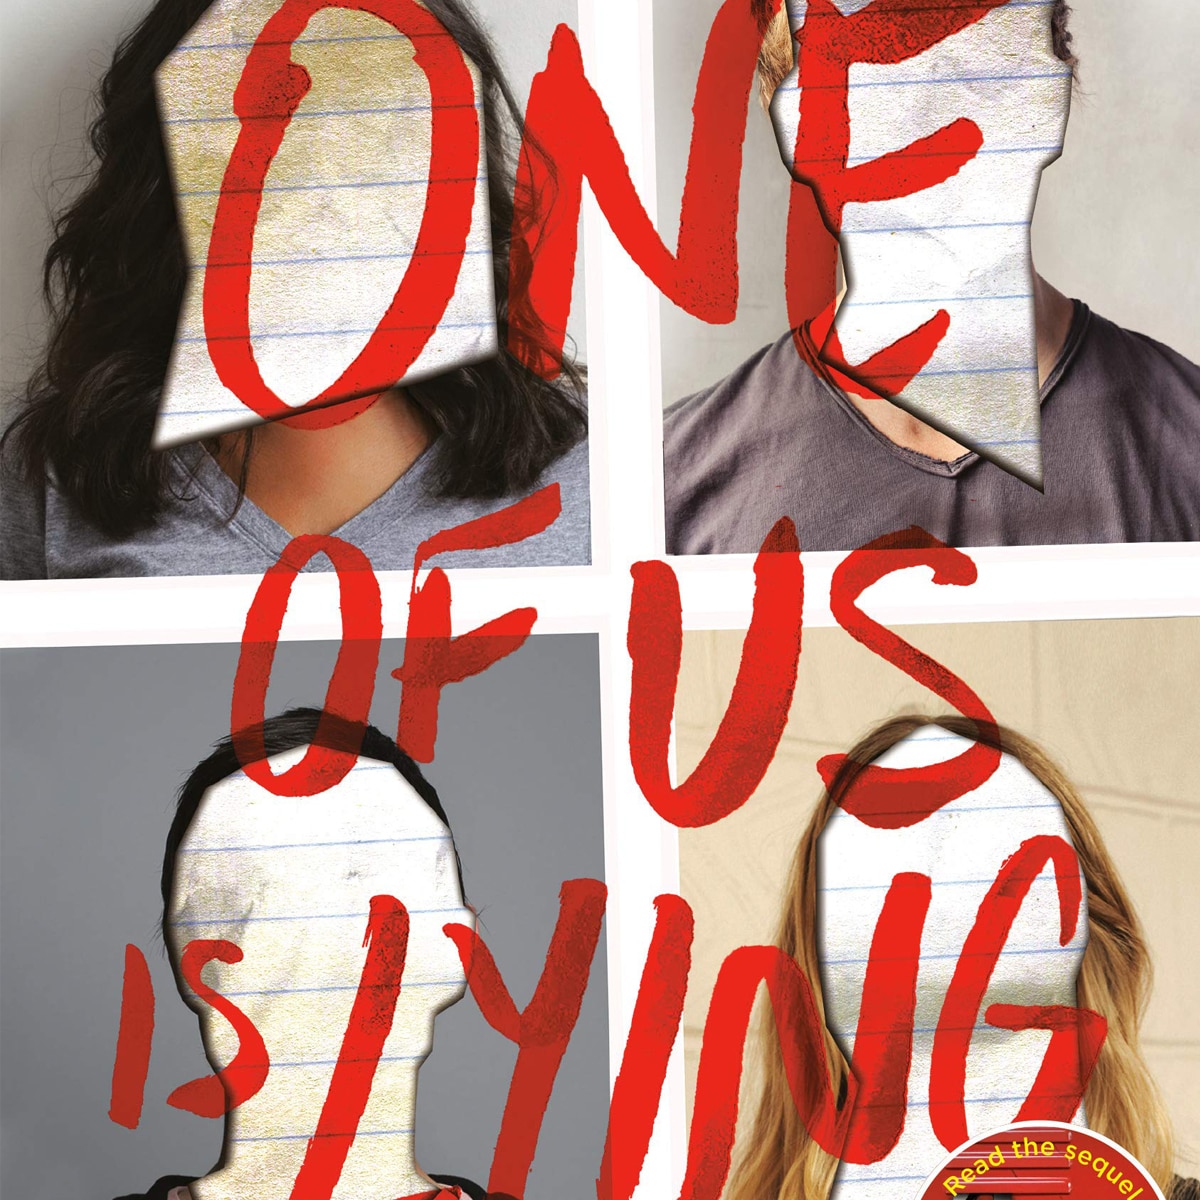 one of us is lying series book